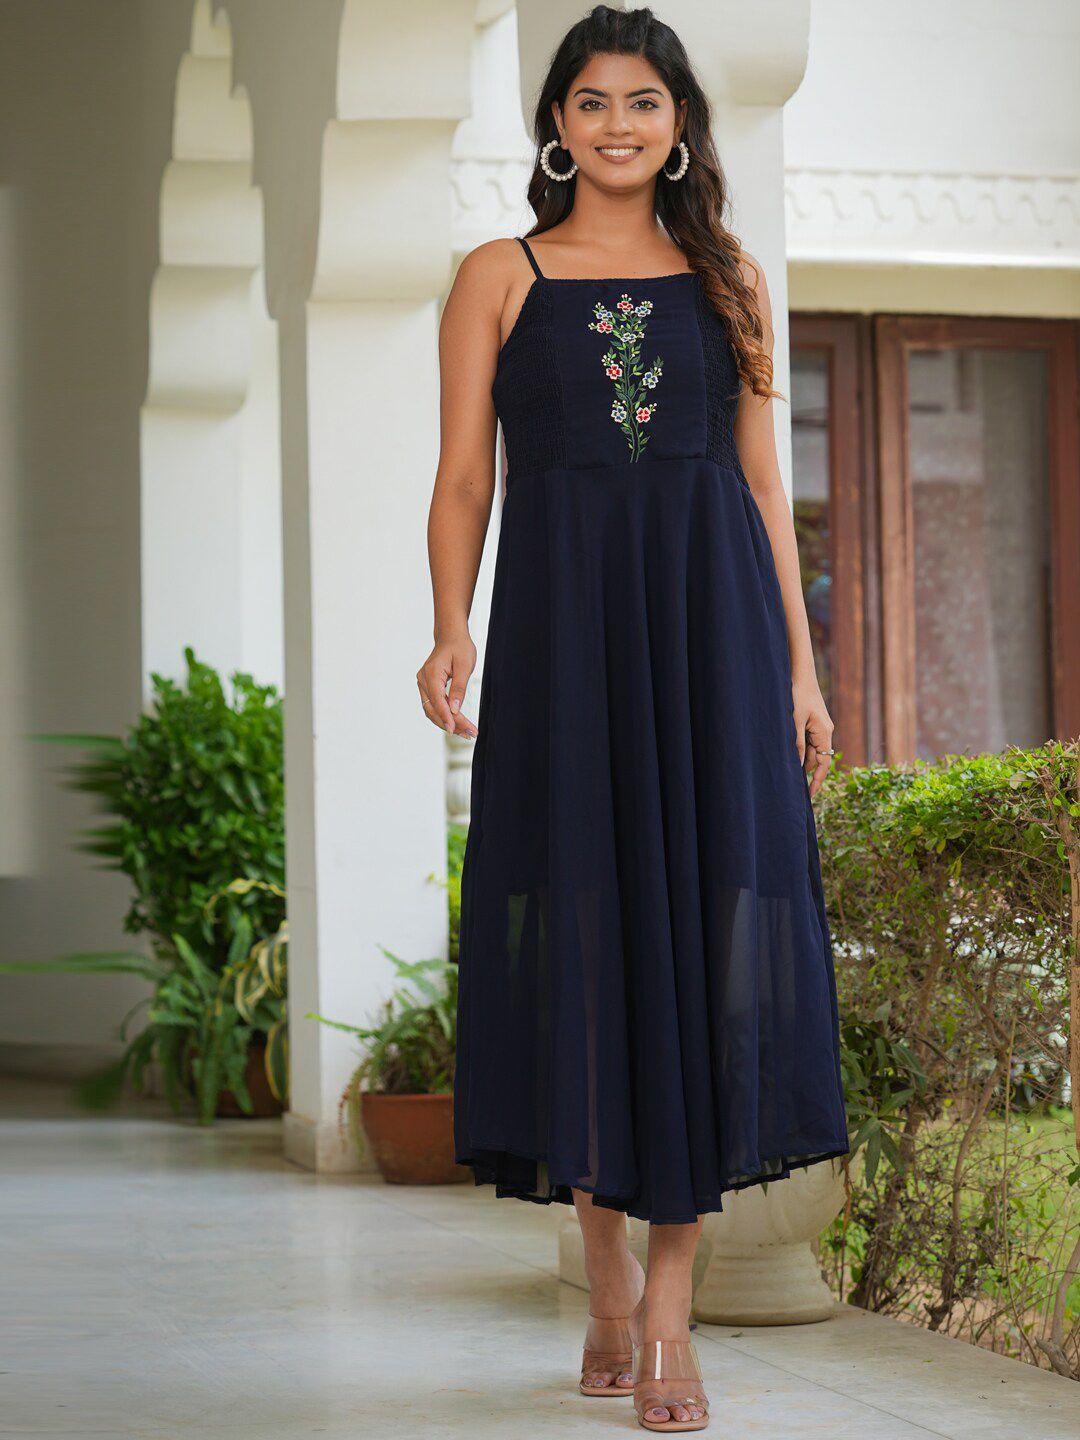 yash-gallery-floral-embroidered-sleeveless-maxi-dress